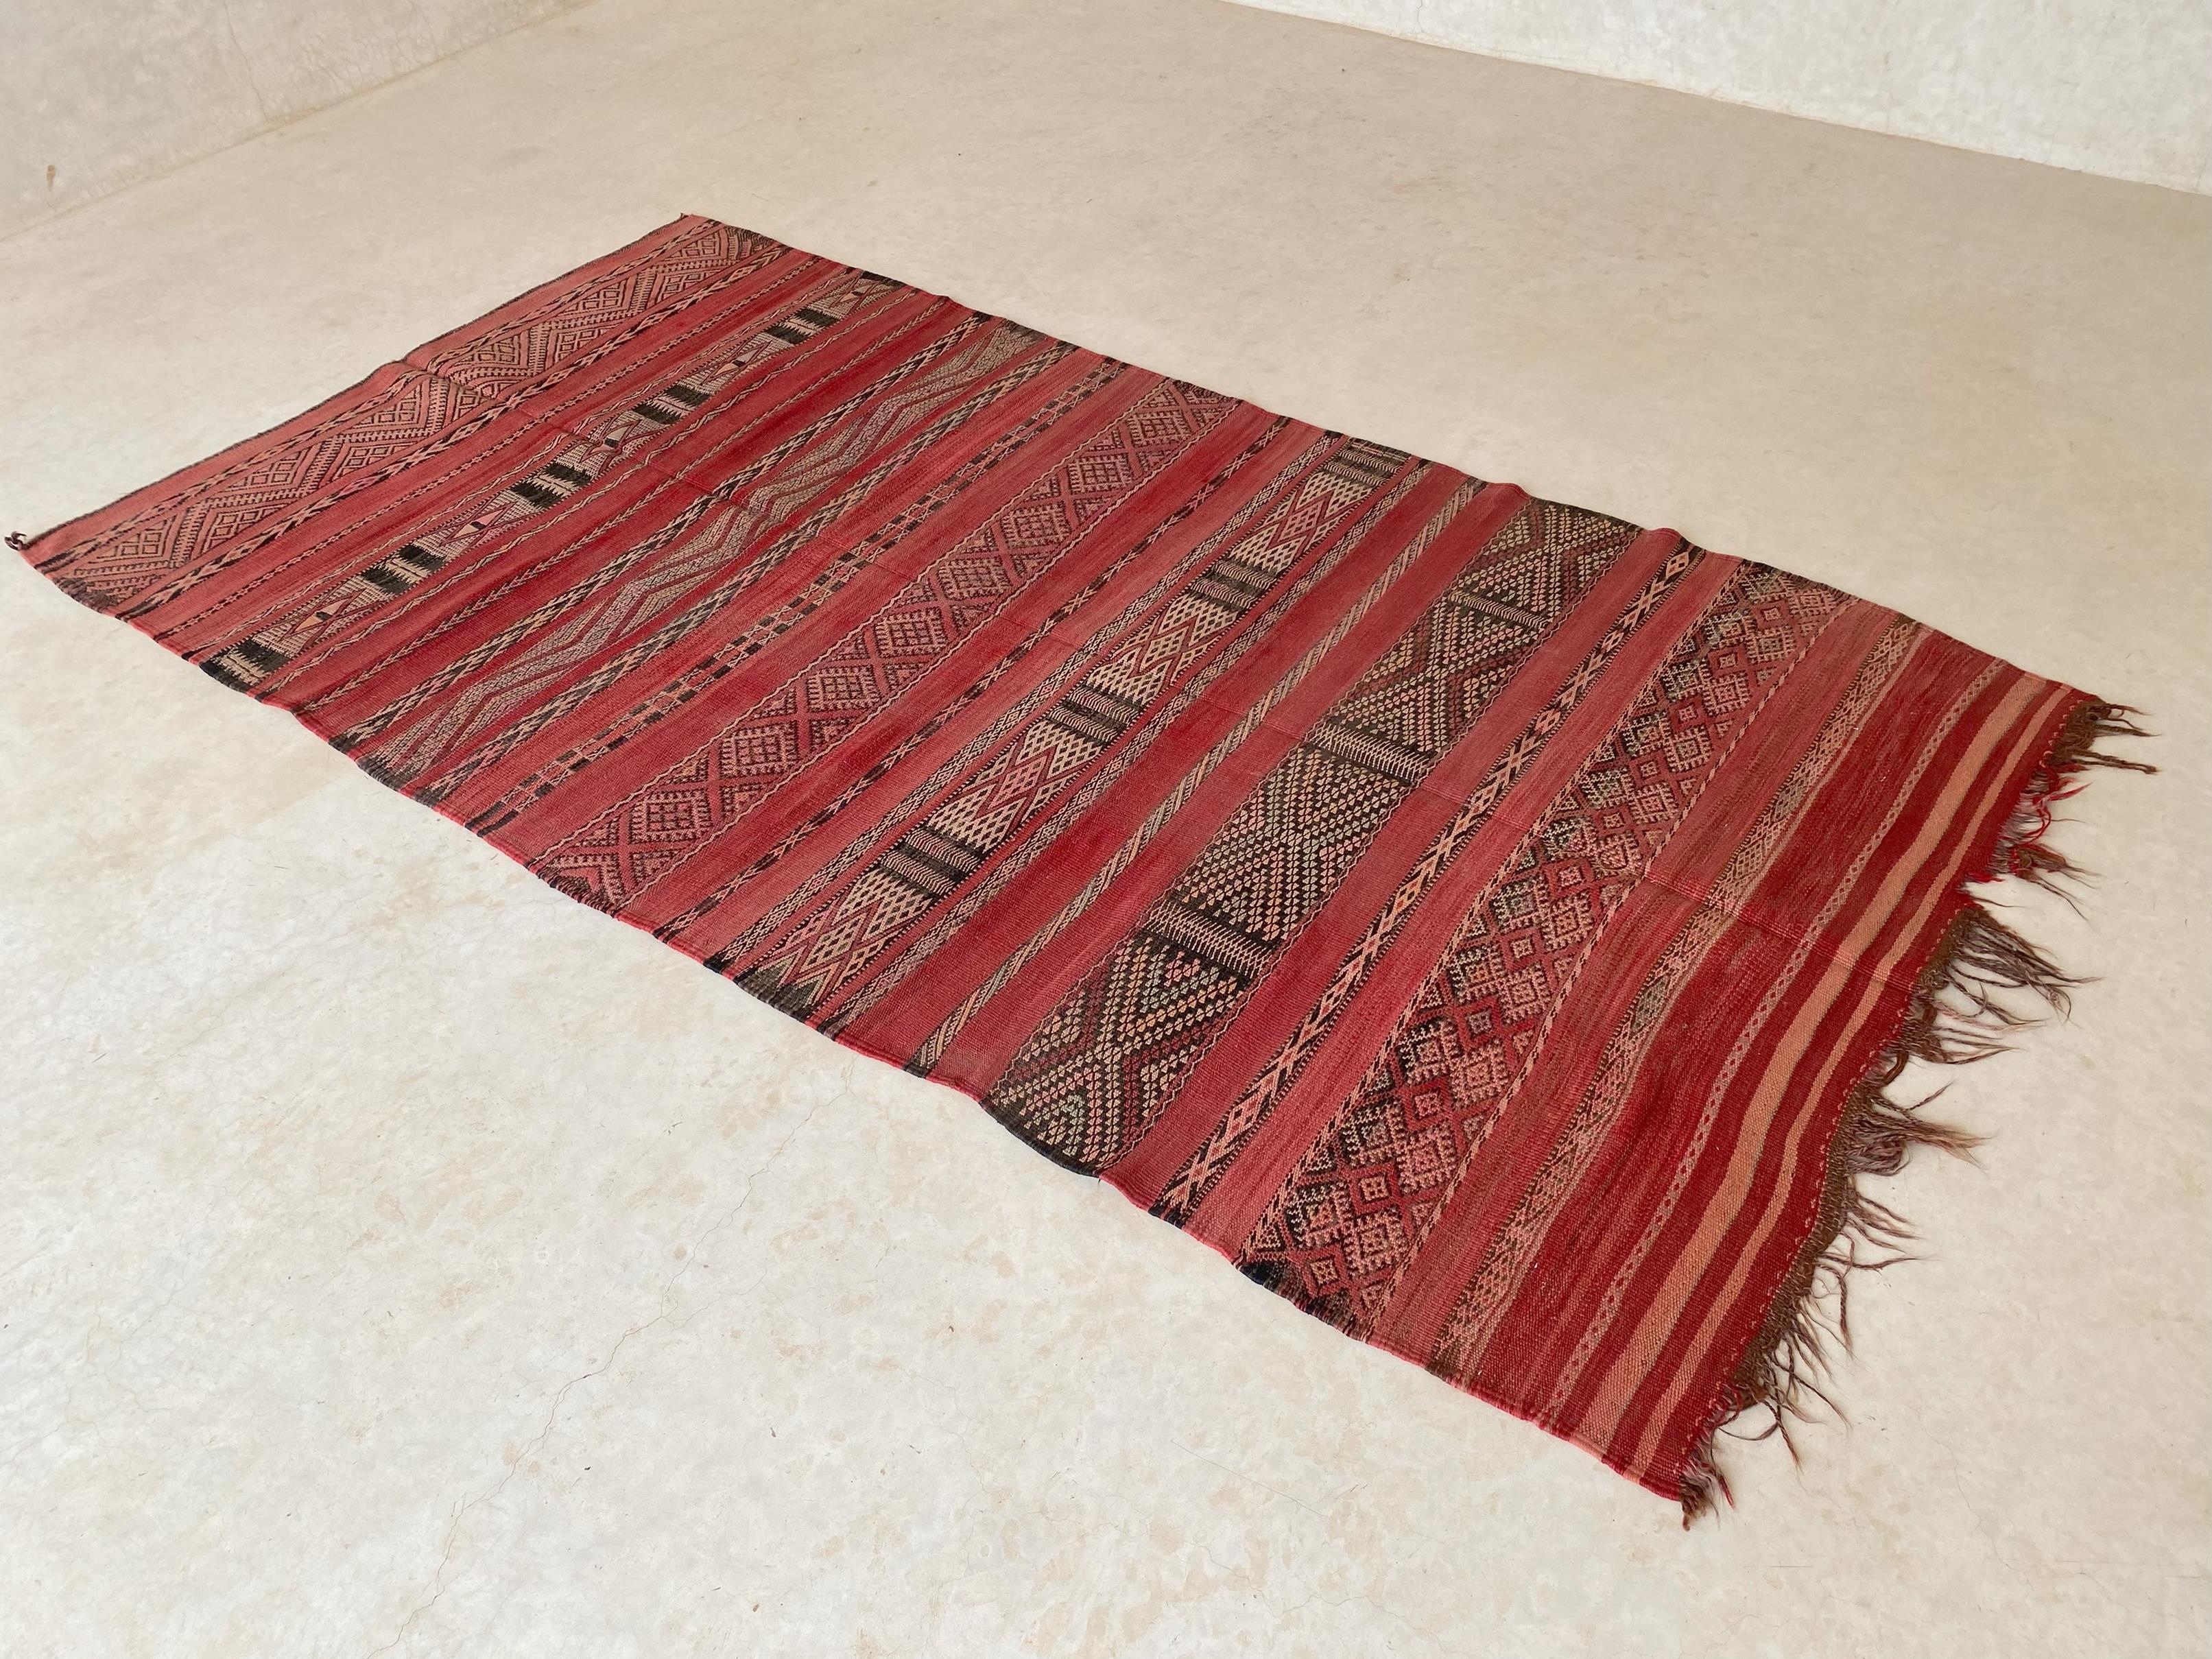 Hand-Woven Vintage Moroccan Kilim rug - Red - 5x9.2feet / 152x282cm For Sale